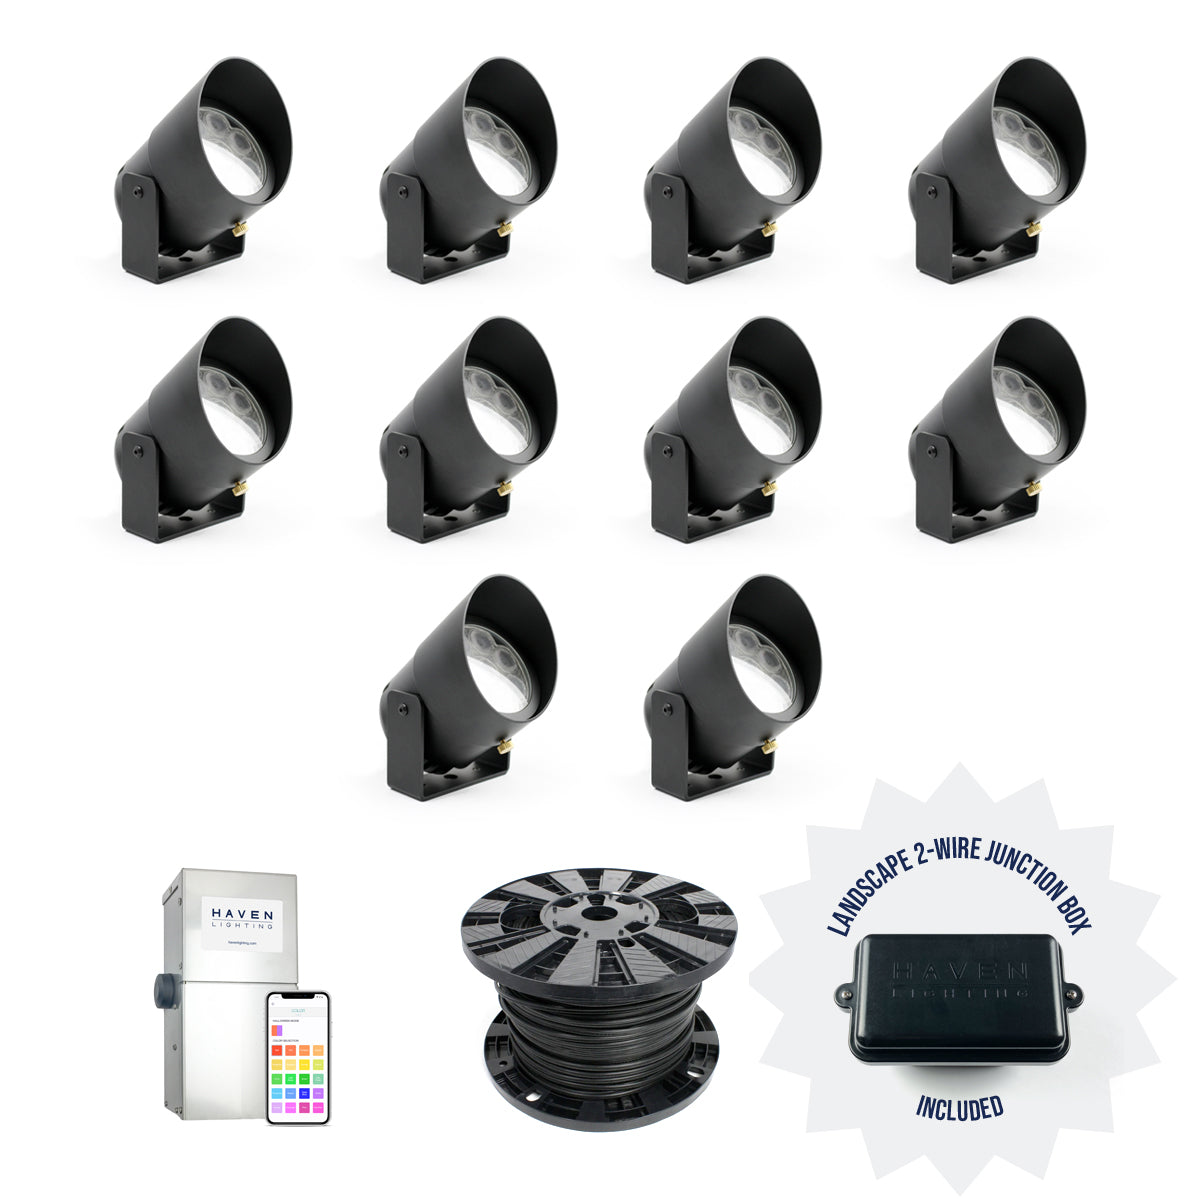 9 Series Classic White Landscape Lighting Packages